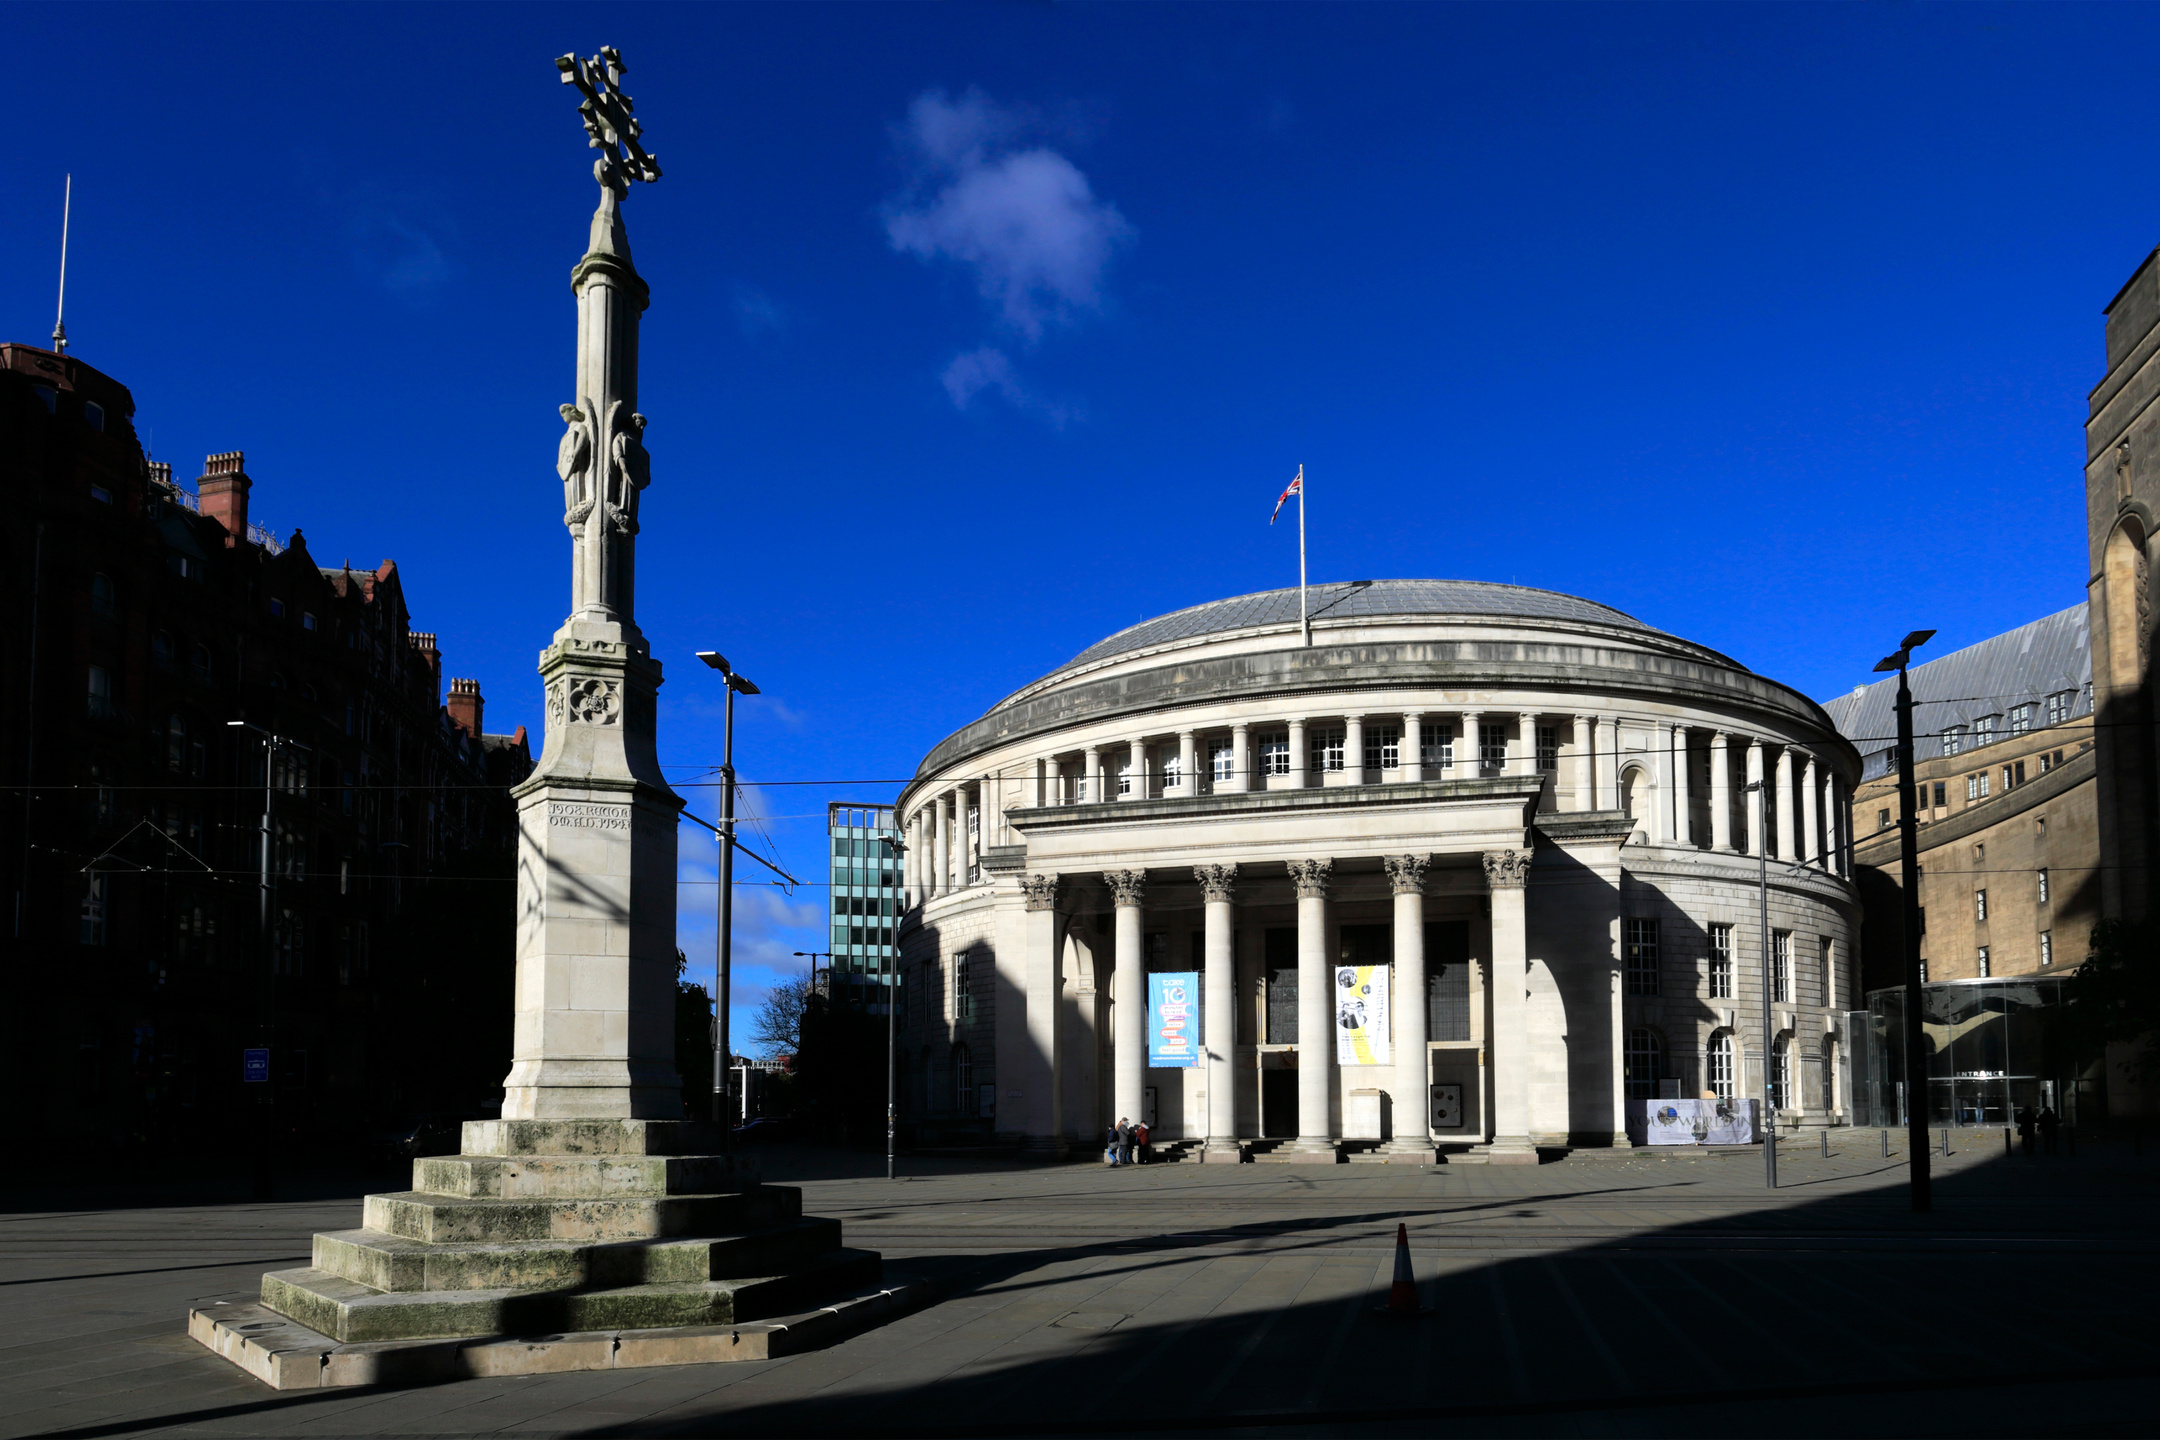 Manchester Central Library, St Peters Square, Manchester City, L